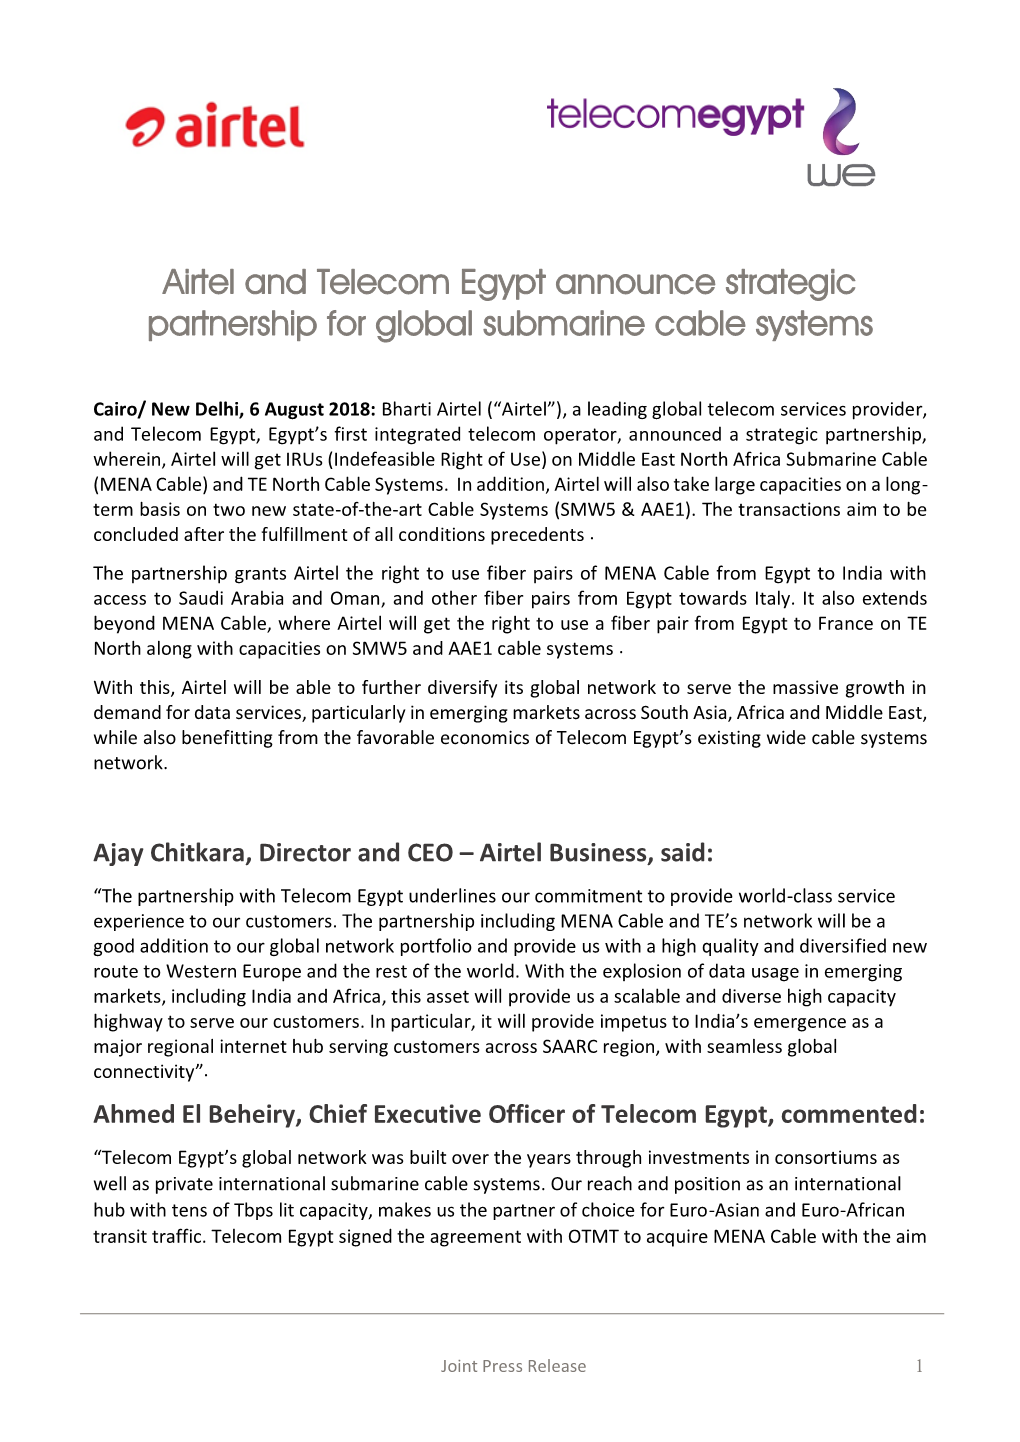 Airtel and Telecom Egypt Announce Strategic Partnership for Global Submarine Cable Systems